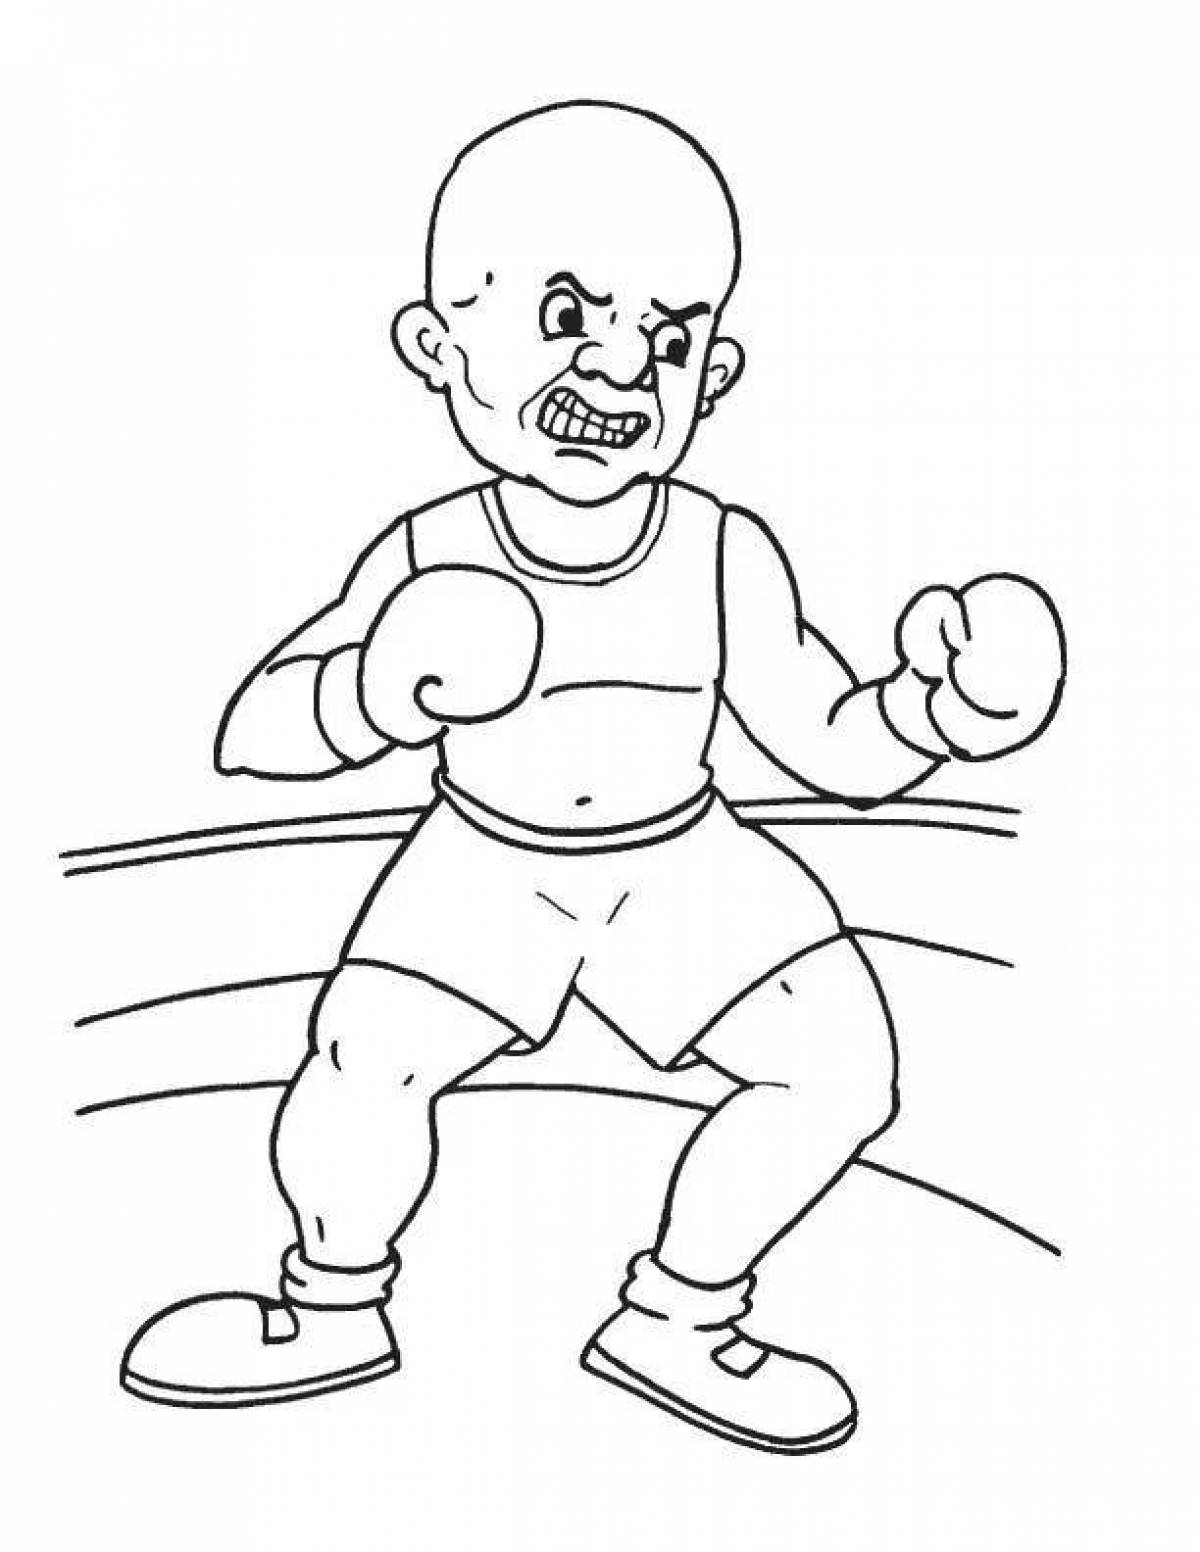 Awesome boxer coloring page